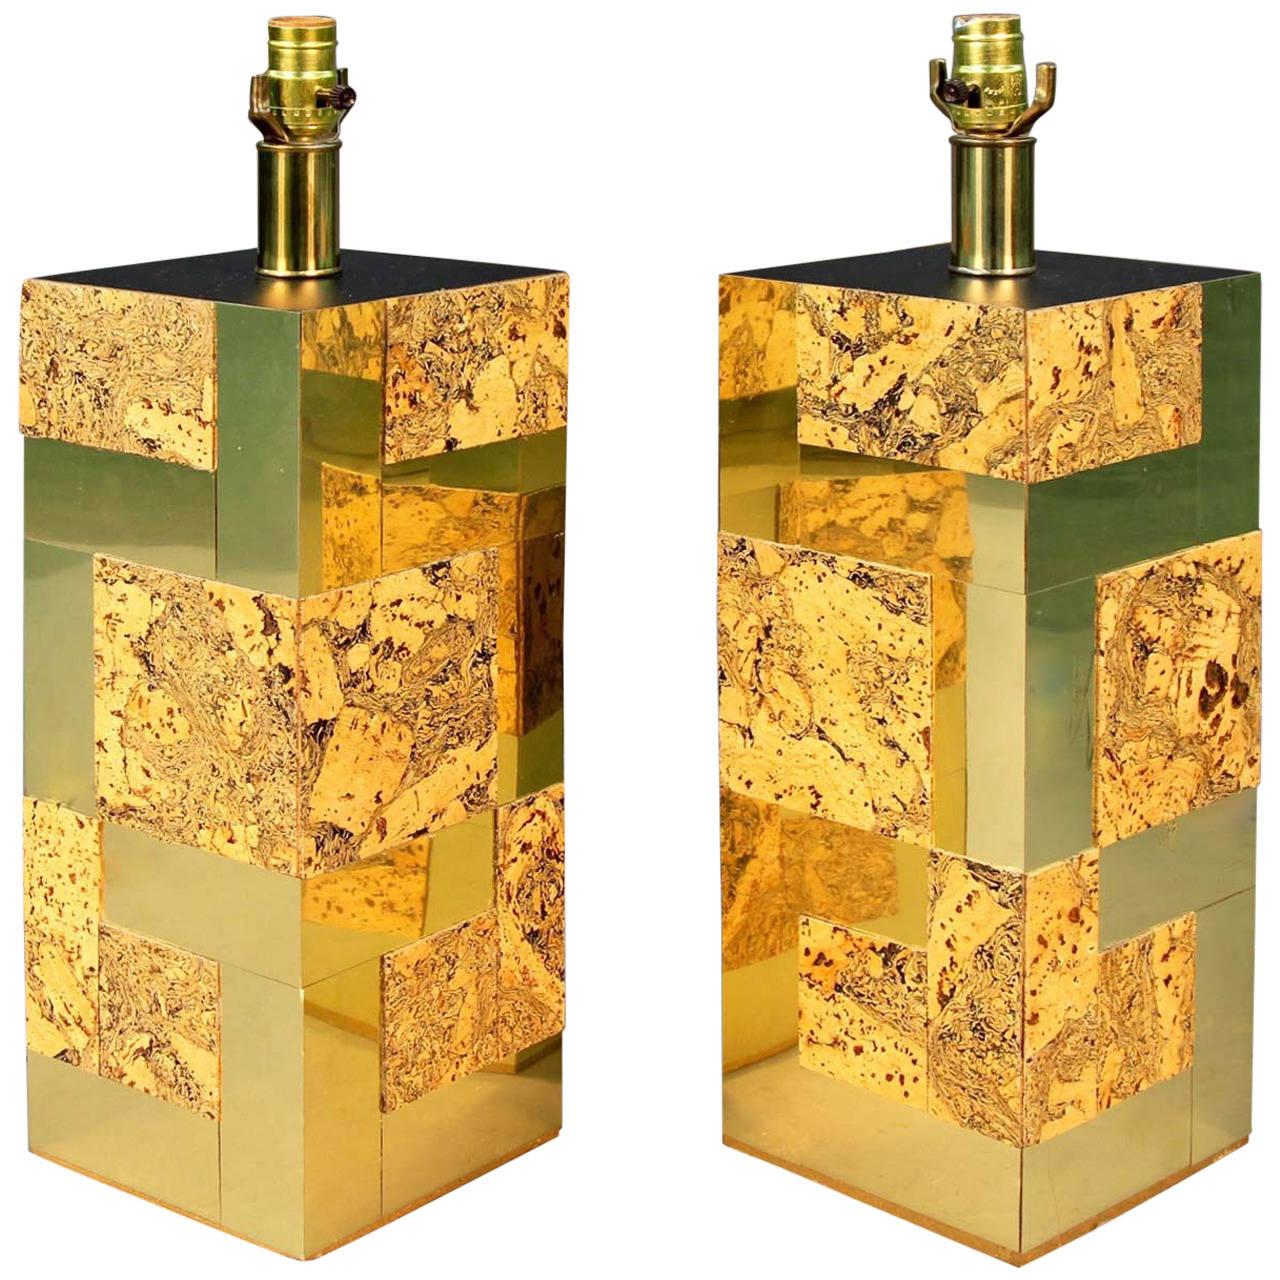 Incredible pair of brass and cork Cityscape lamps by Paul Evans.